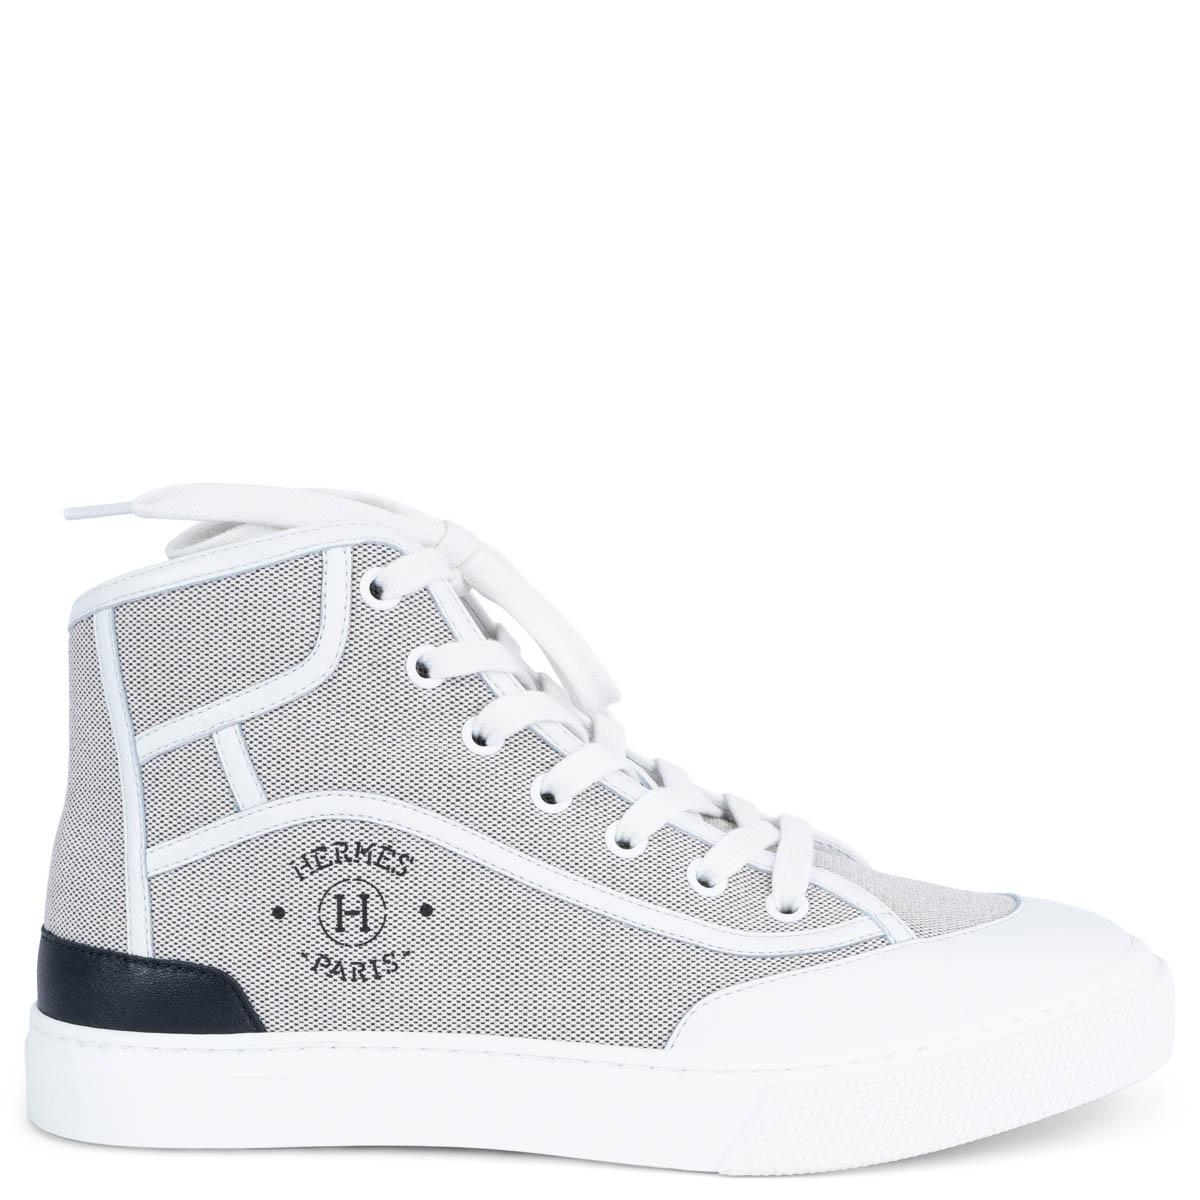 HERMES black & white canvas GET UP High Top Sneakers Shoes 37 For Sale